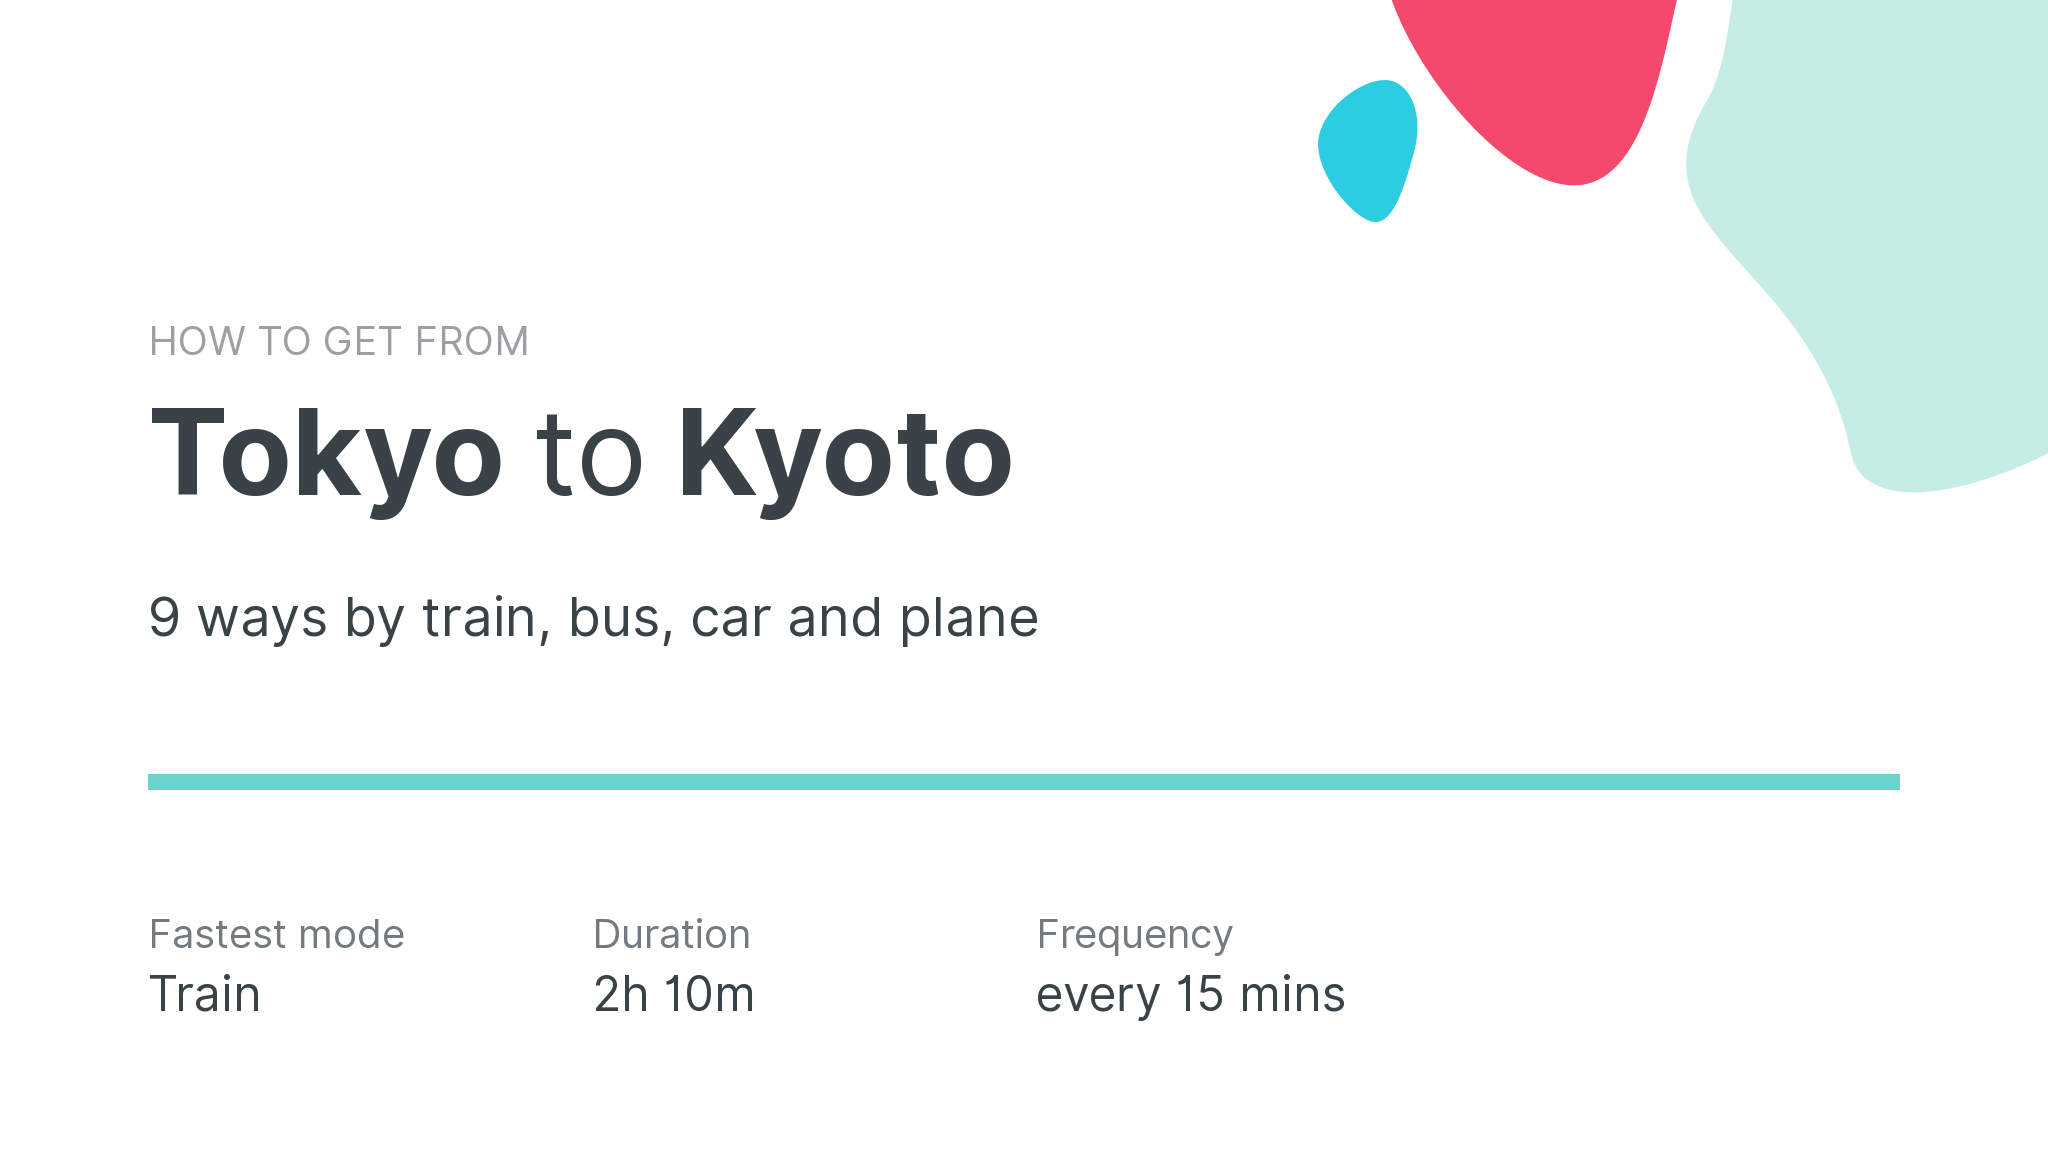 How do I get from Tokyo to Kyoto